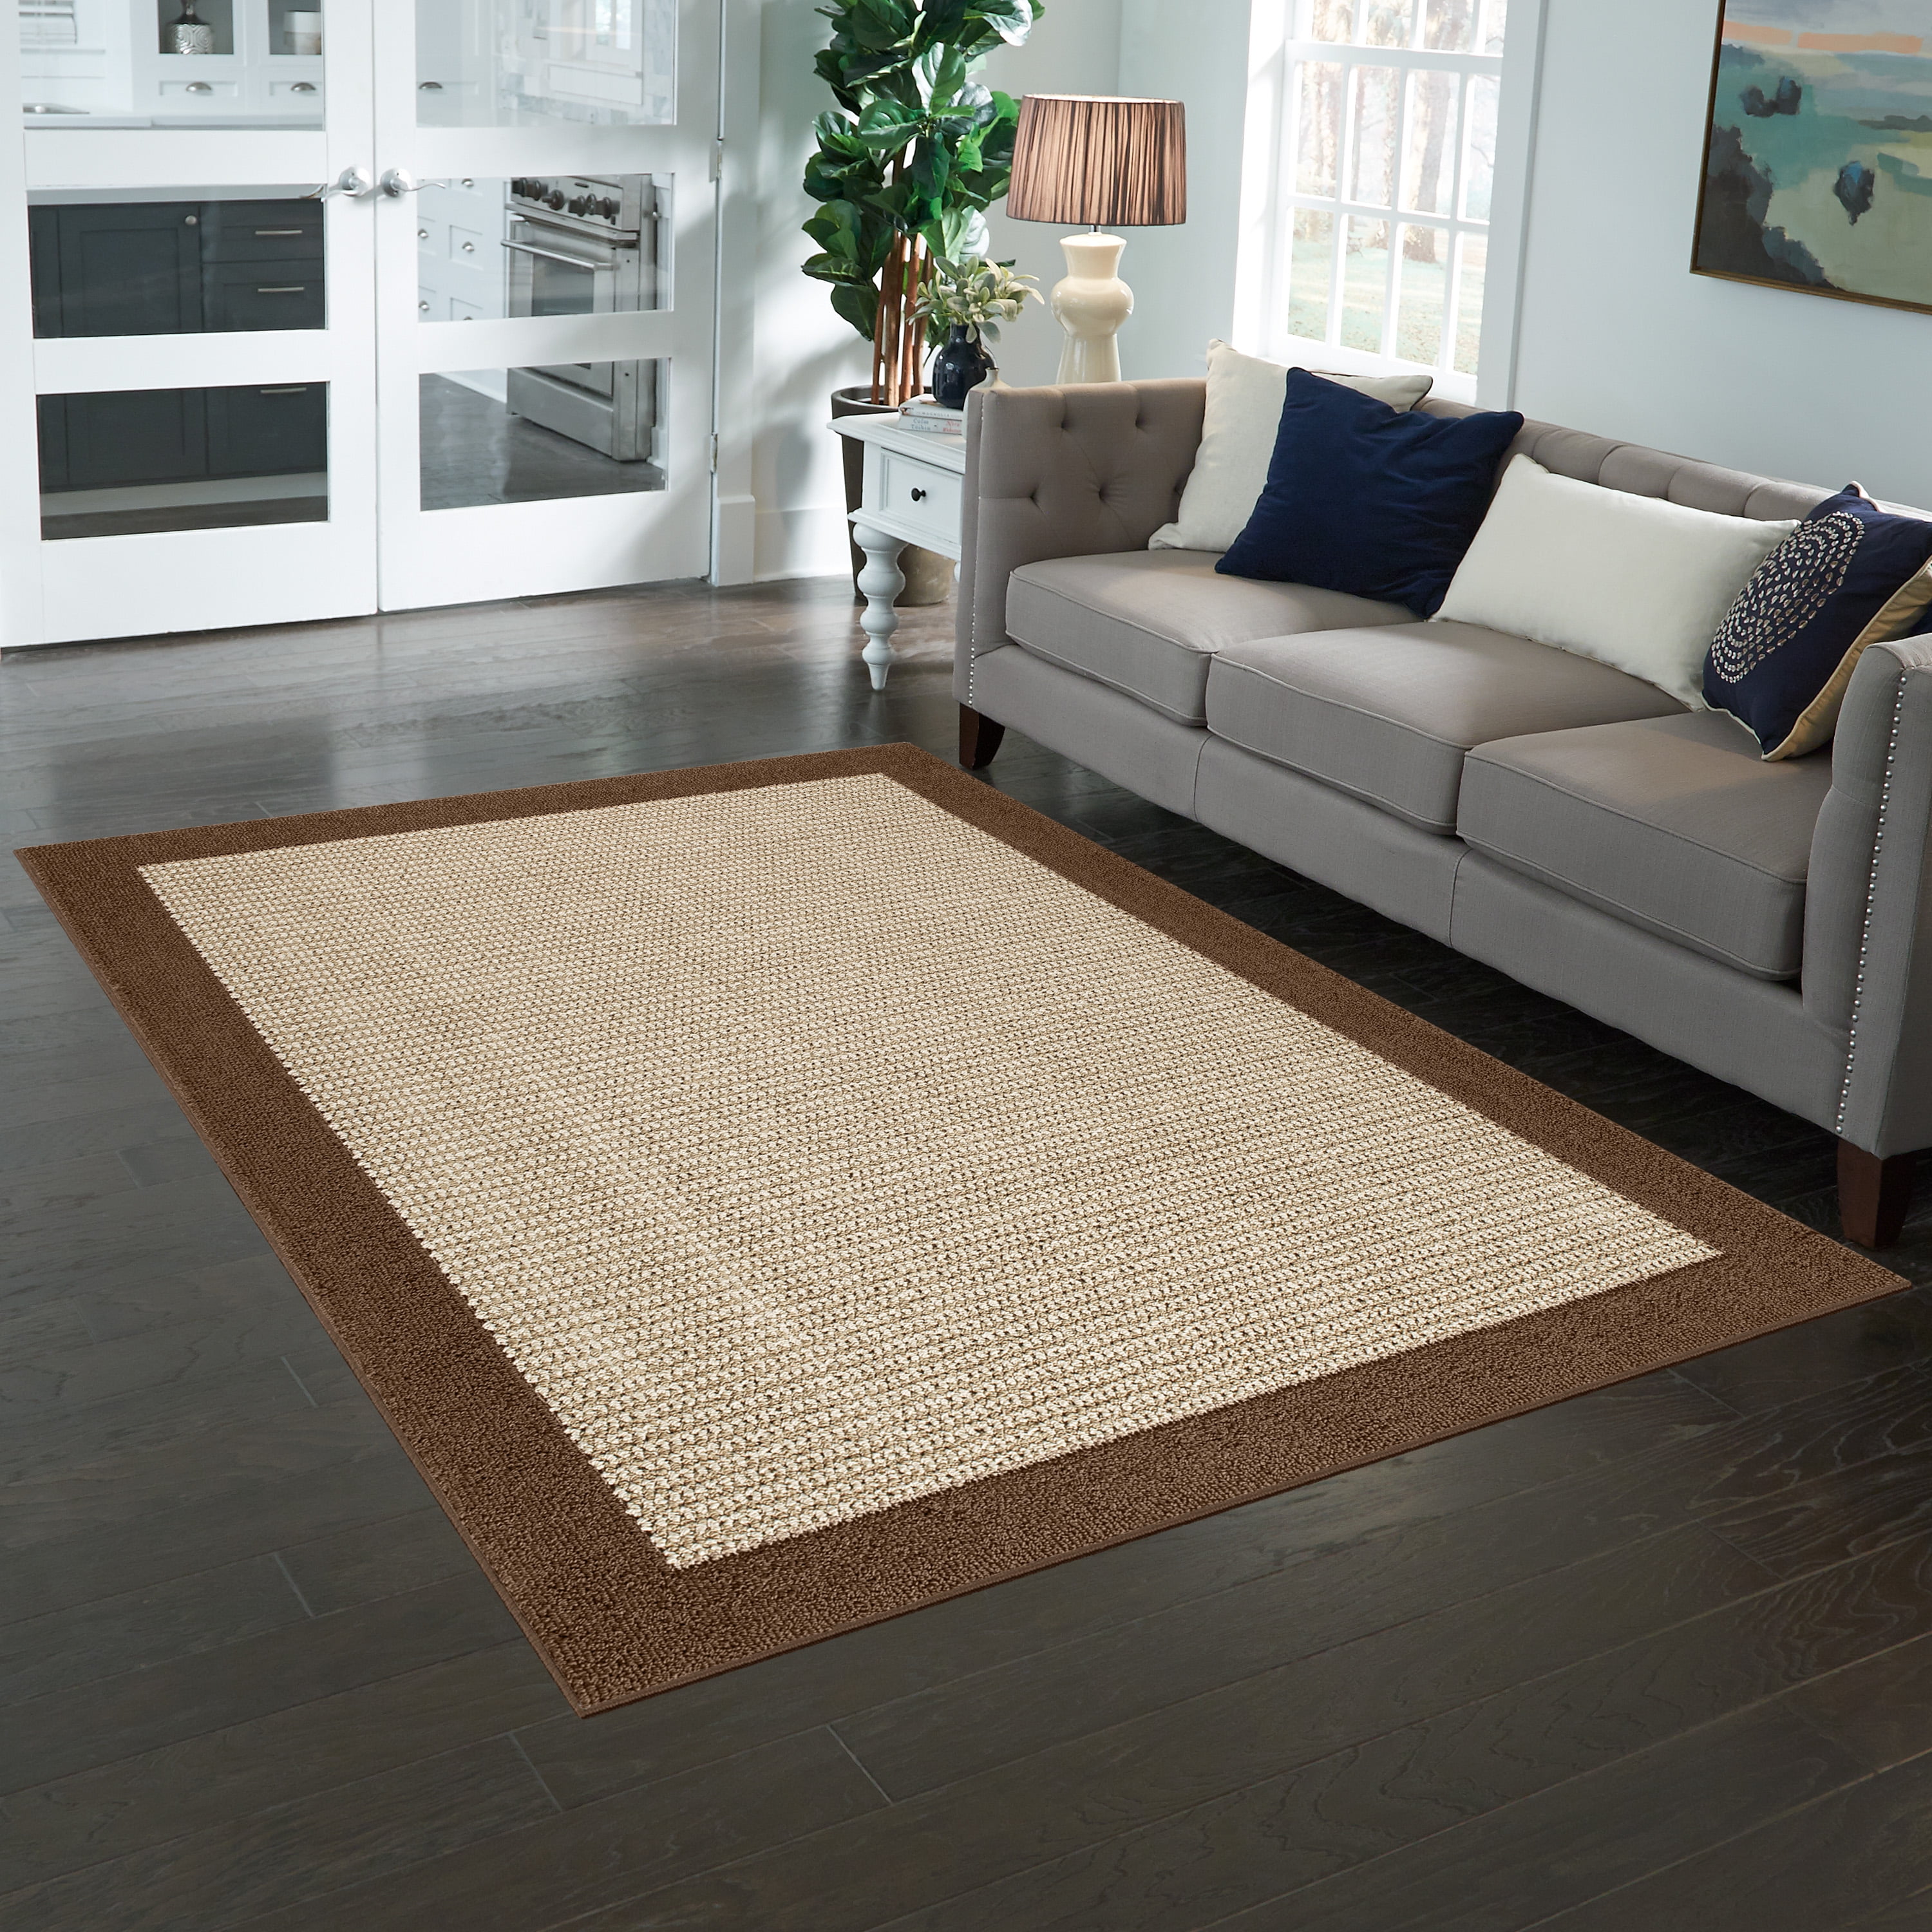  RUG BRANCH Majestic Afghan Persian Chobi Red Beige Indoor Runner  Rug for Entryway, Hallway, Bathroom, and Kitchen - 2' x 20' (Exact Size:  2'3 X 20') : Home & Kitchen